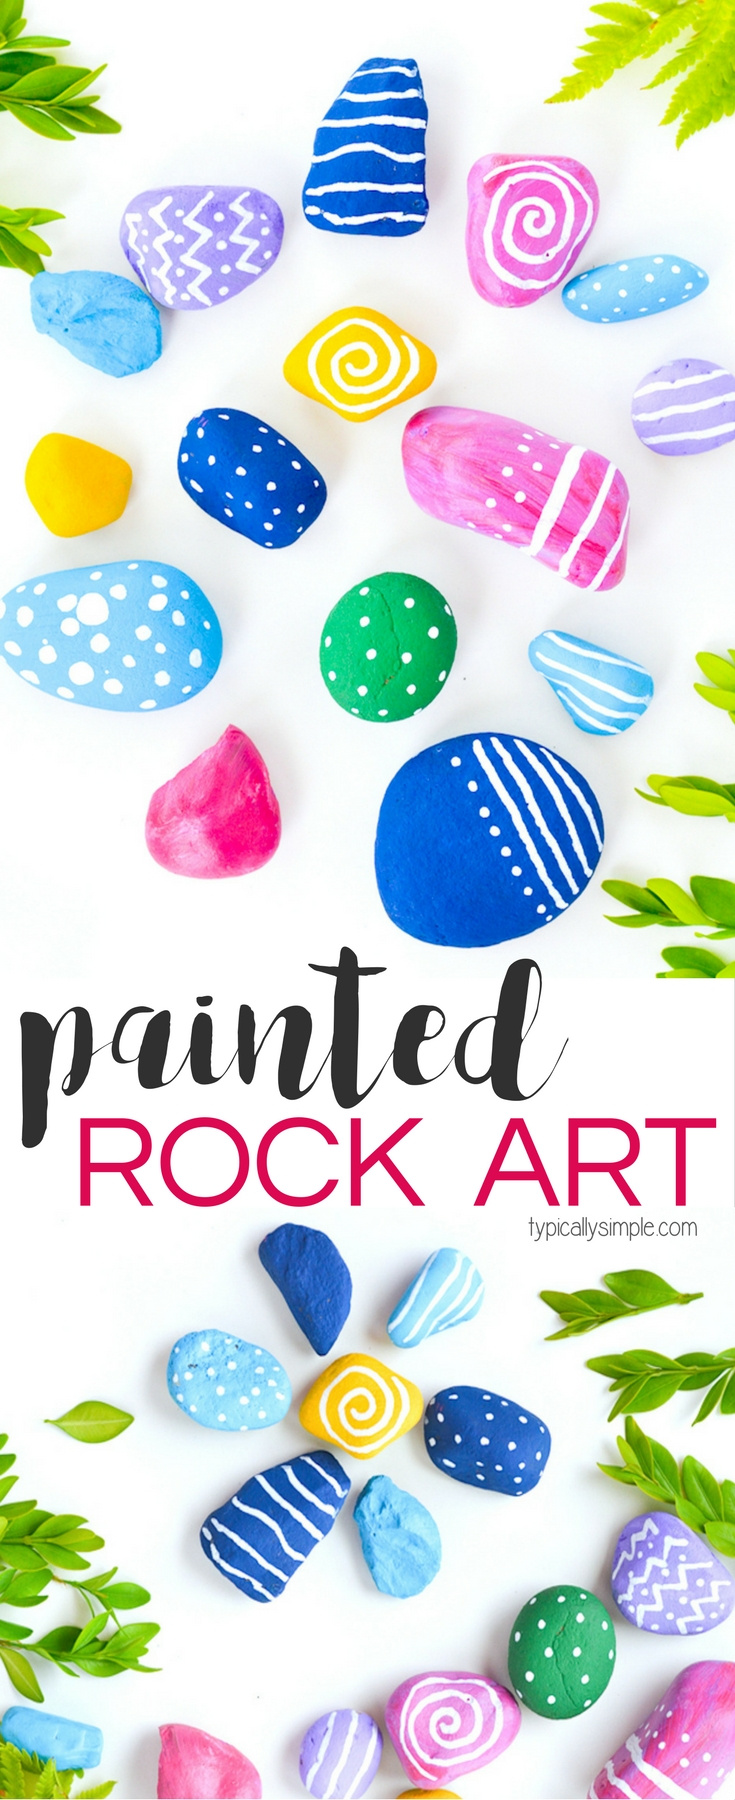 Typically Simple Painted Rocks These bright and colorful rocks are made while on trips, you can always carry bright markers to create these keepsakes